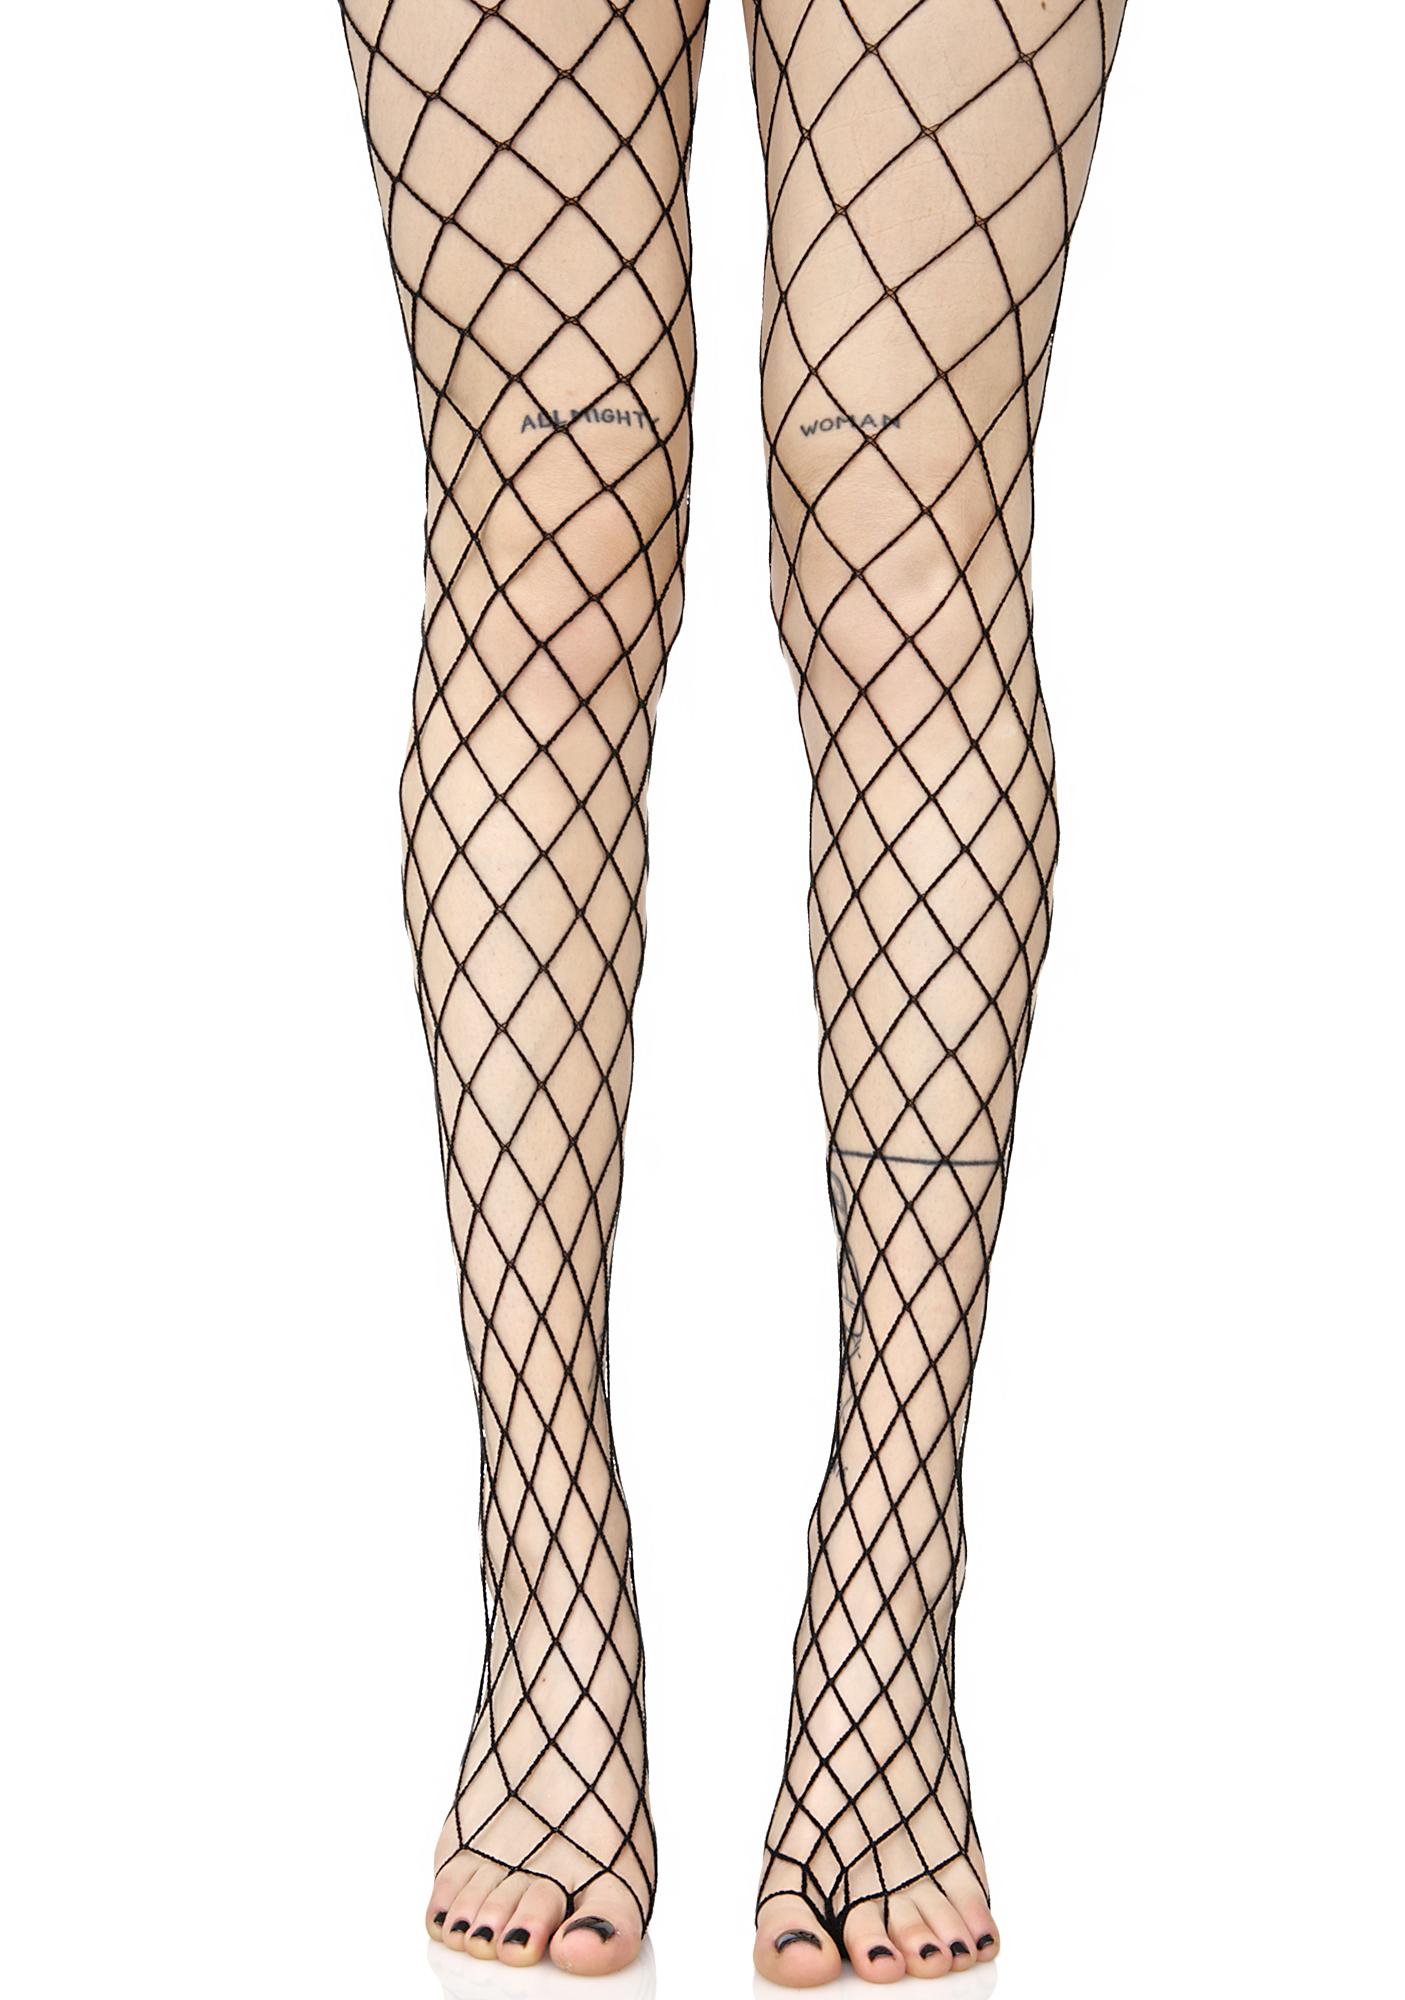 Fish nets over pantyhose